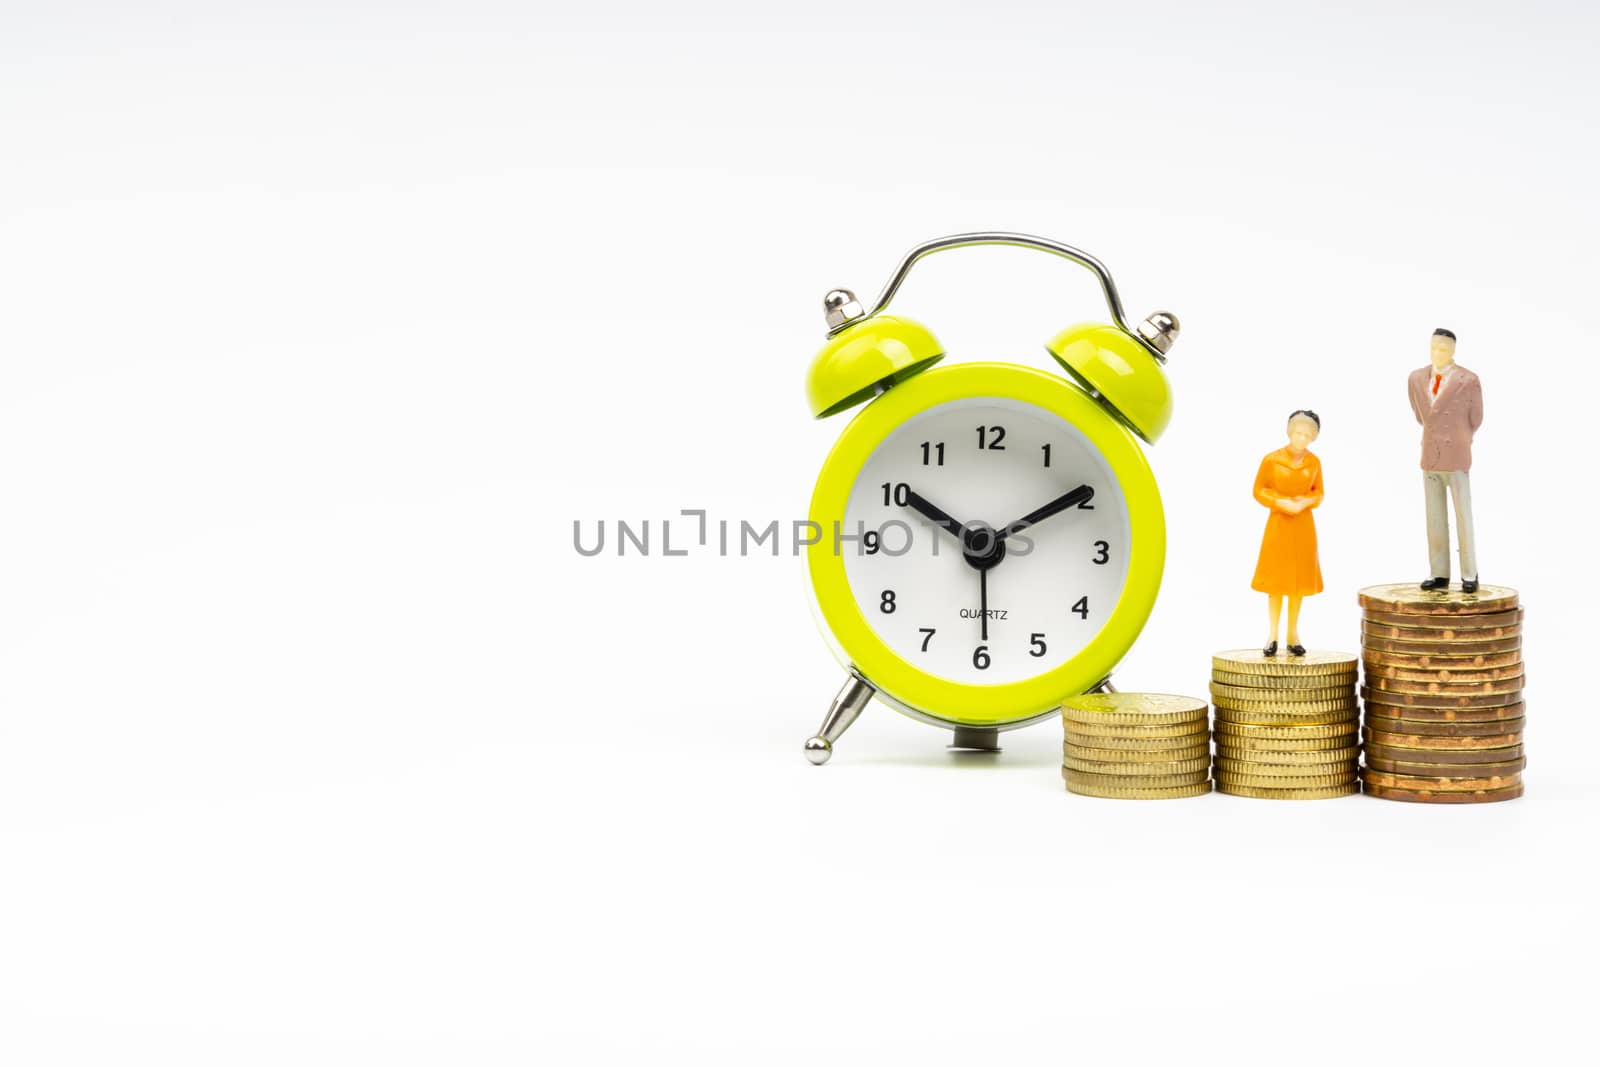 Kuala Lumpur, Malaysia - March 2, 2019 : Alarm Clock and Miniature people standing on stacking coins with white background. Business and Lifestyle concepts.